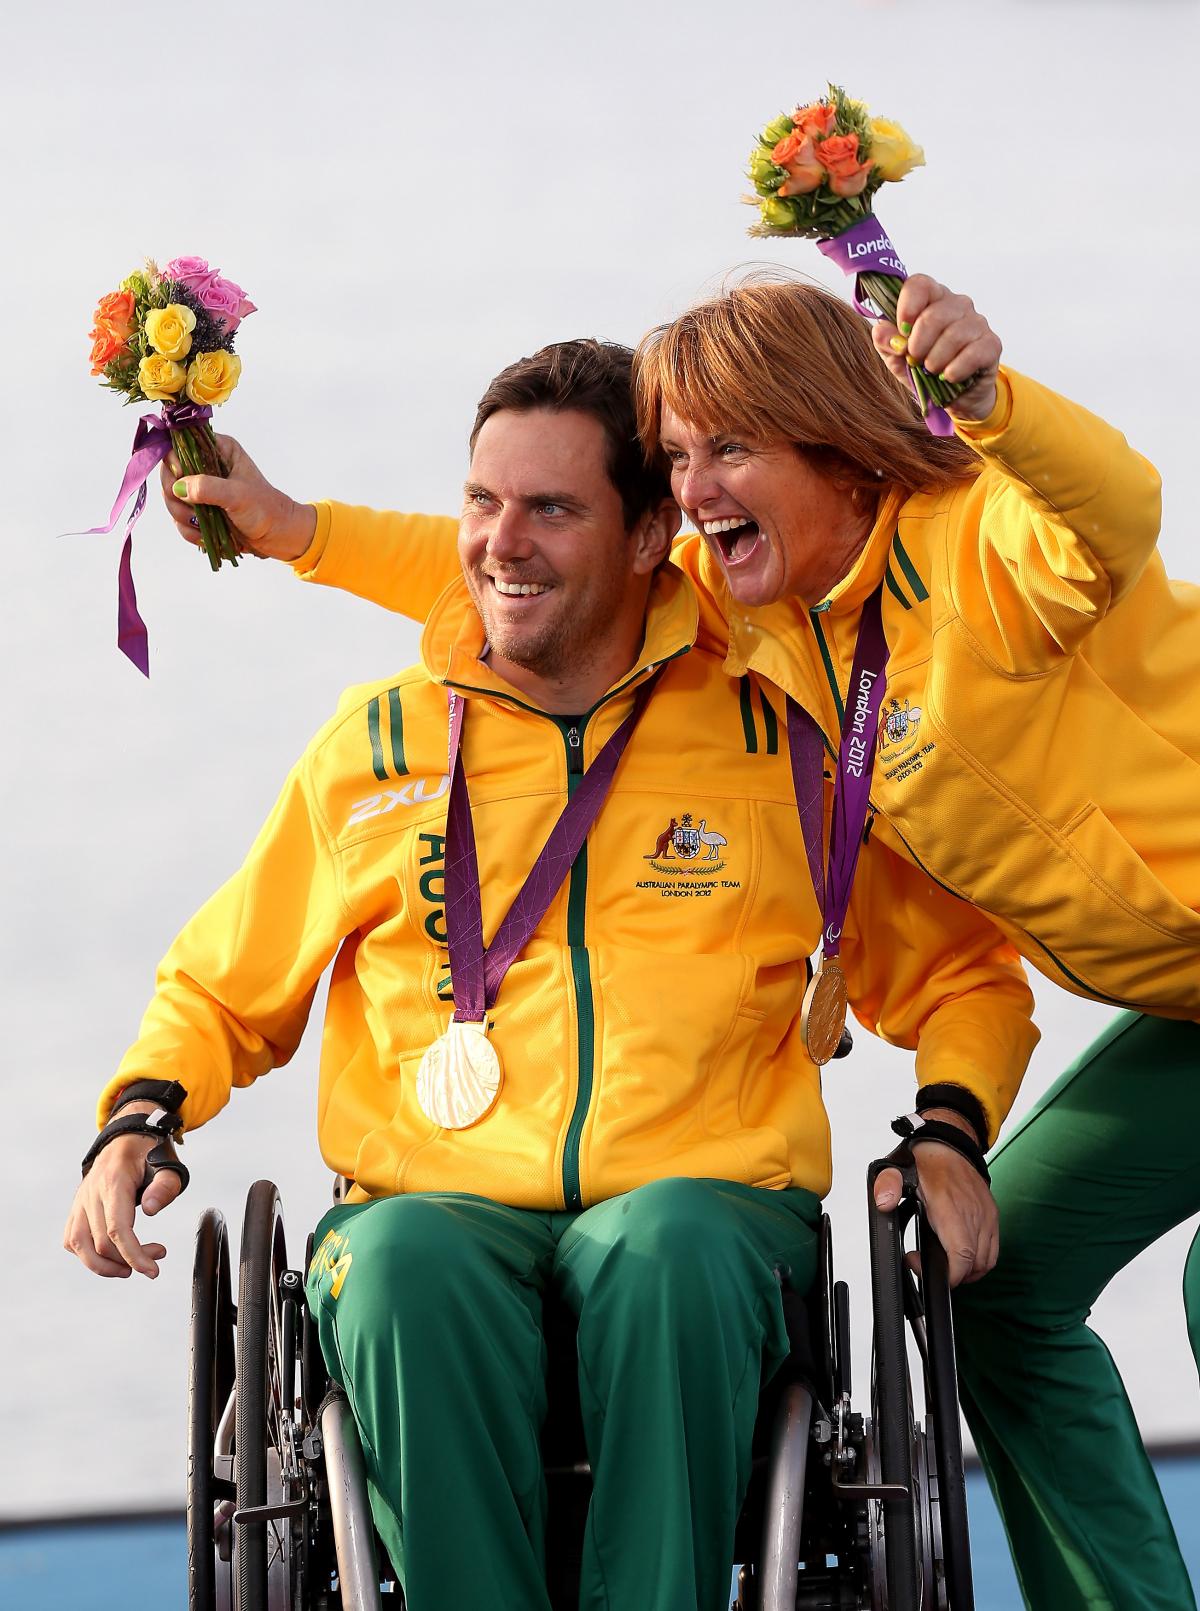 A picture of a man in a wheelchair and woman celebrating their victory with a gold medal around their necks